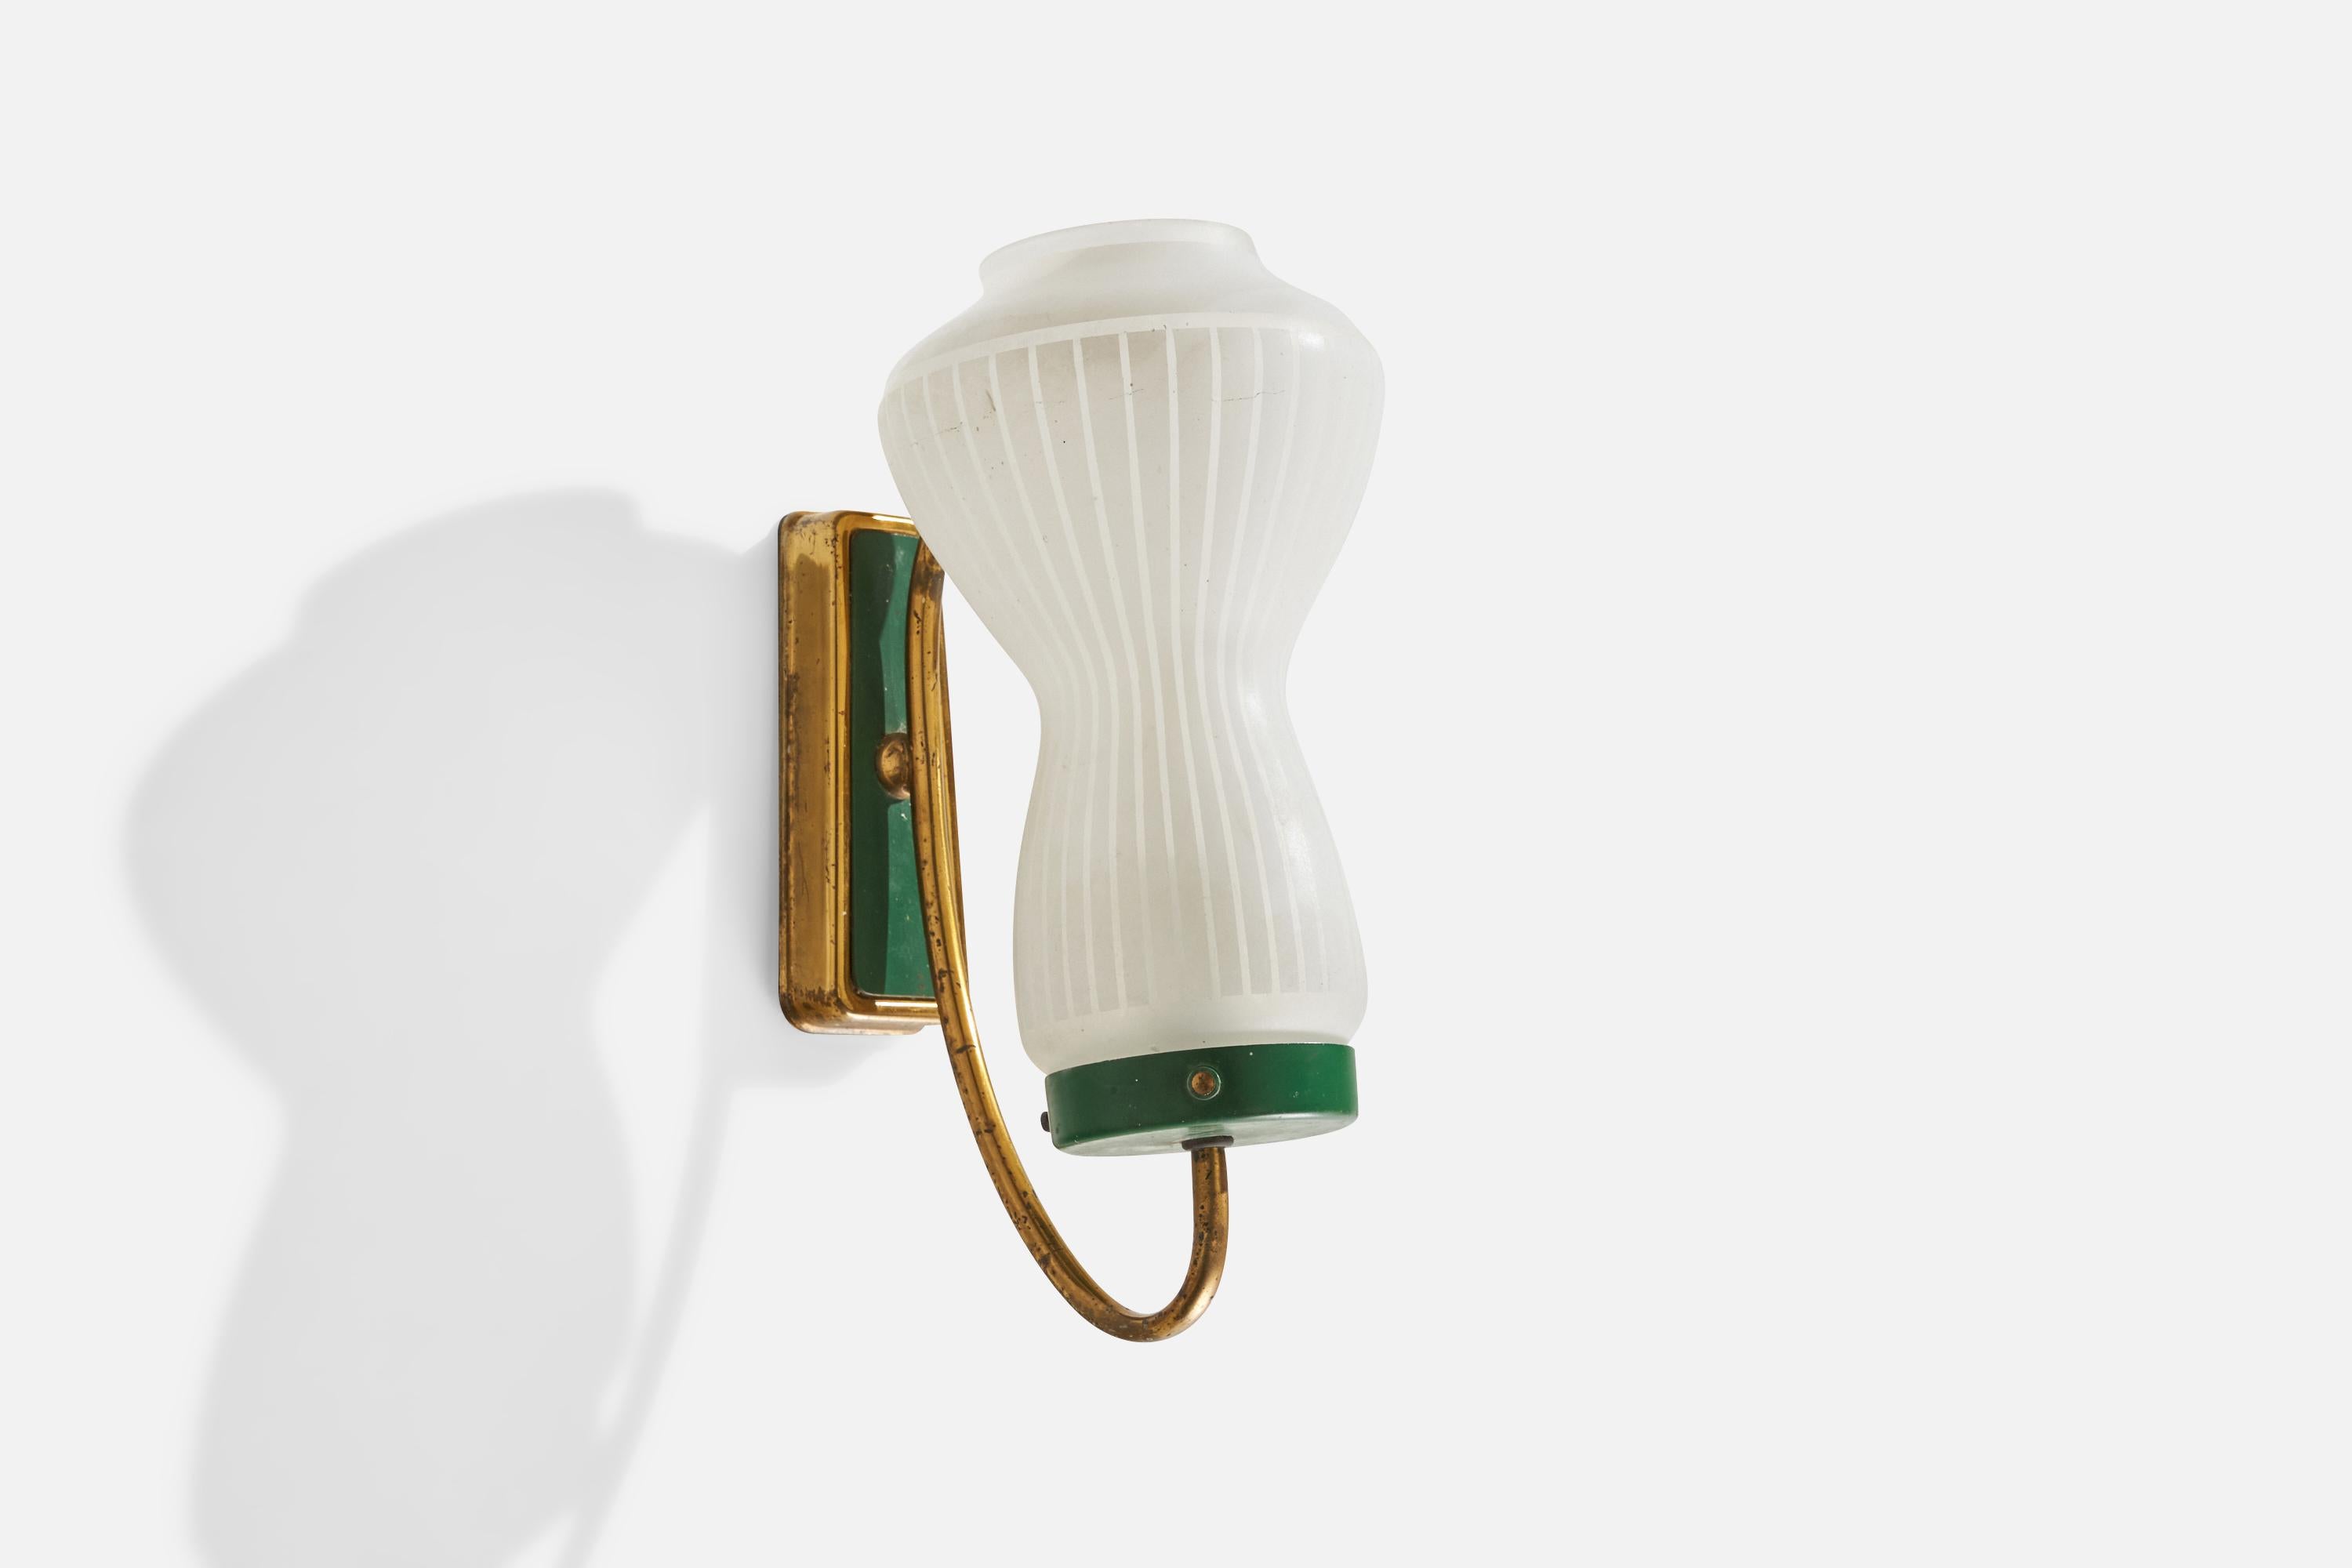 A single brass, green-lacquered metal and etched glass wall light, designed and produced in Italy, 1950s.

Overall Dimensions (inches): 9.75” H x 4.75” W x 6” D
Back Plate Dimensions (inches): 4.8” H x 1.9” W x 0.8” D
Bulb Specifications: E-14